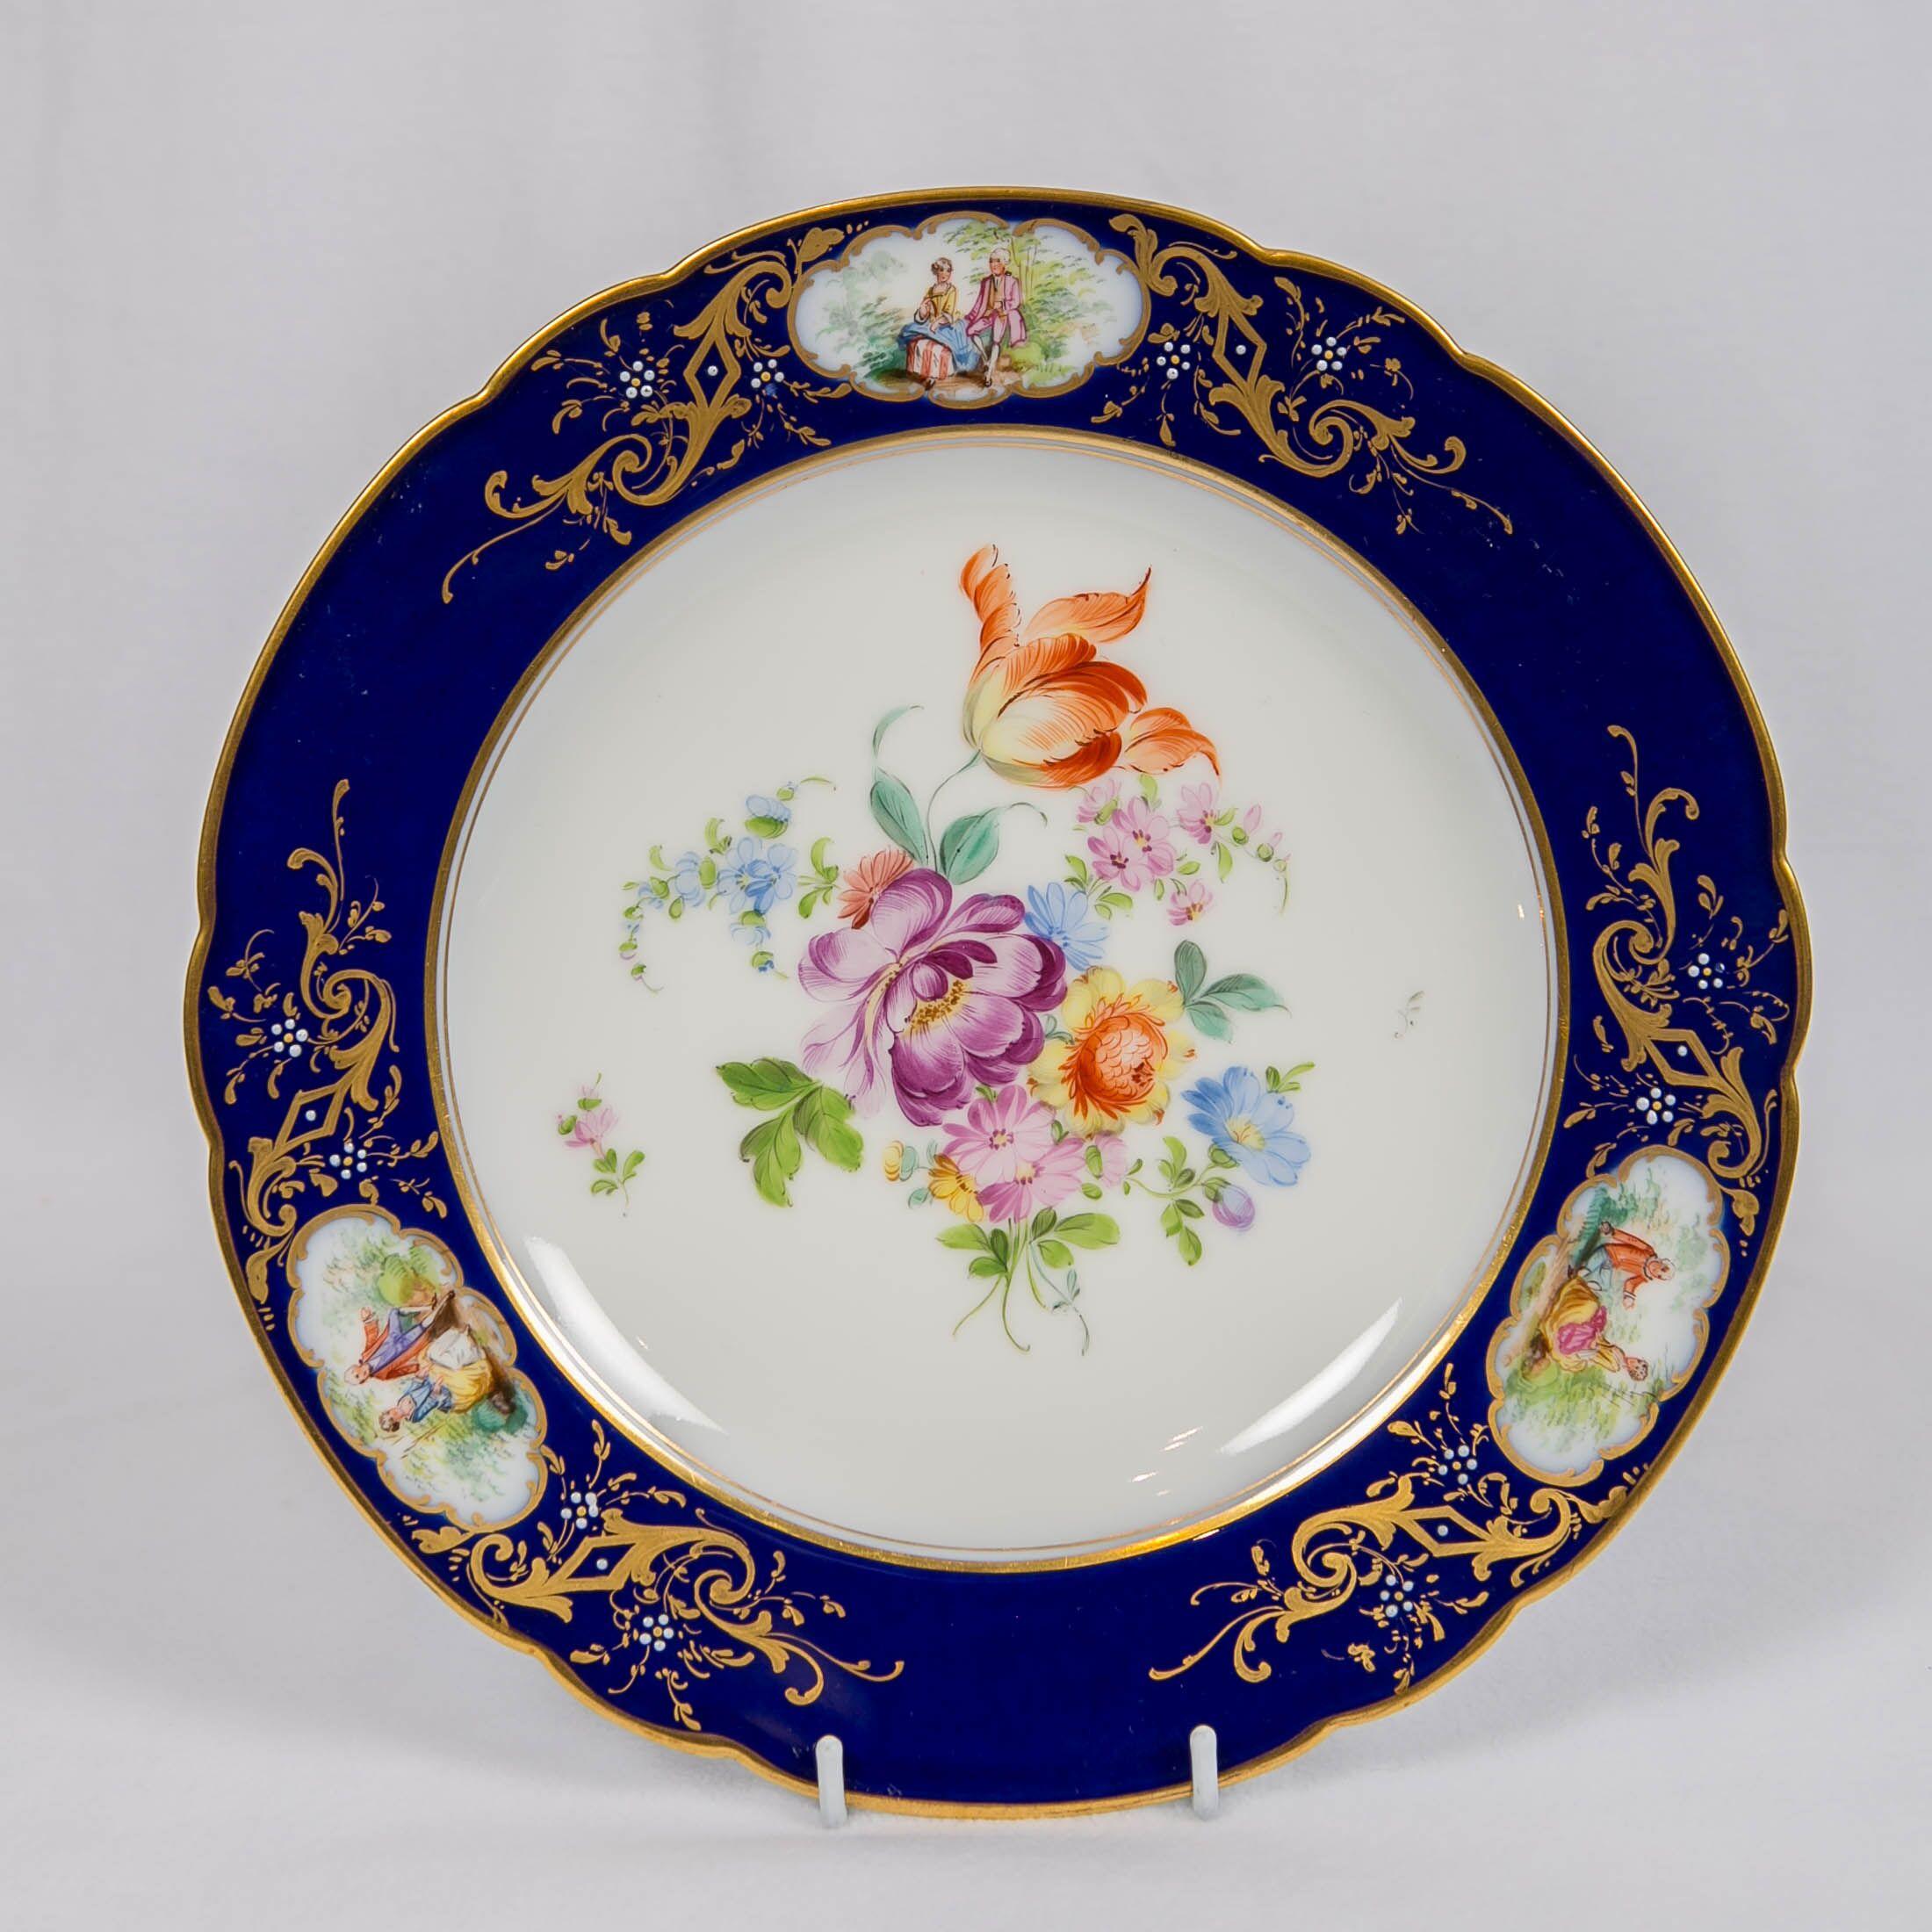 We are pleased to offer this set of a dozen Dresden China dinner dishes with a beautiful, large bouquet of colorful flowers in the center, encircled by deep blue borders decorated with scrolling gilt and three cartouches showing romantic